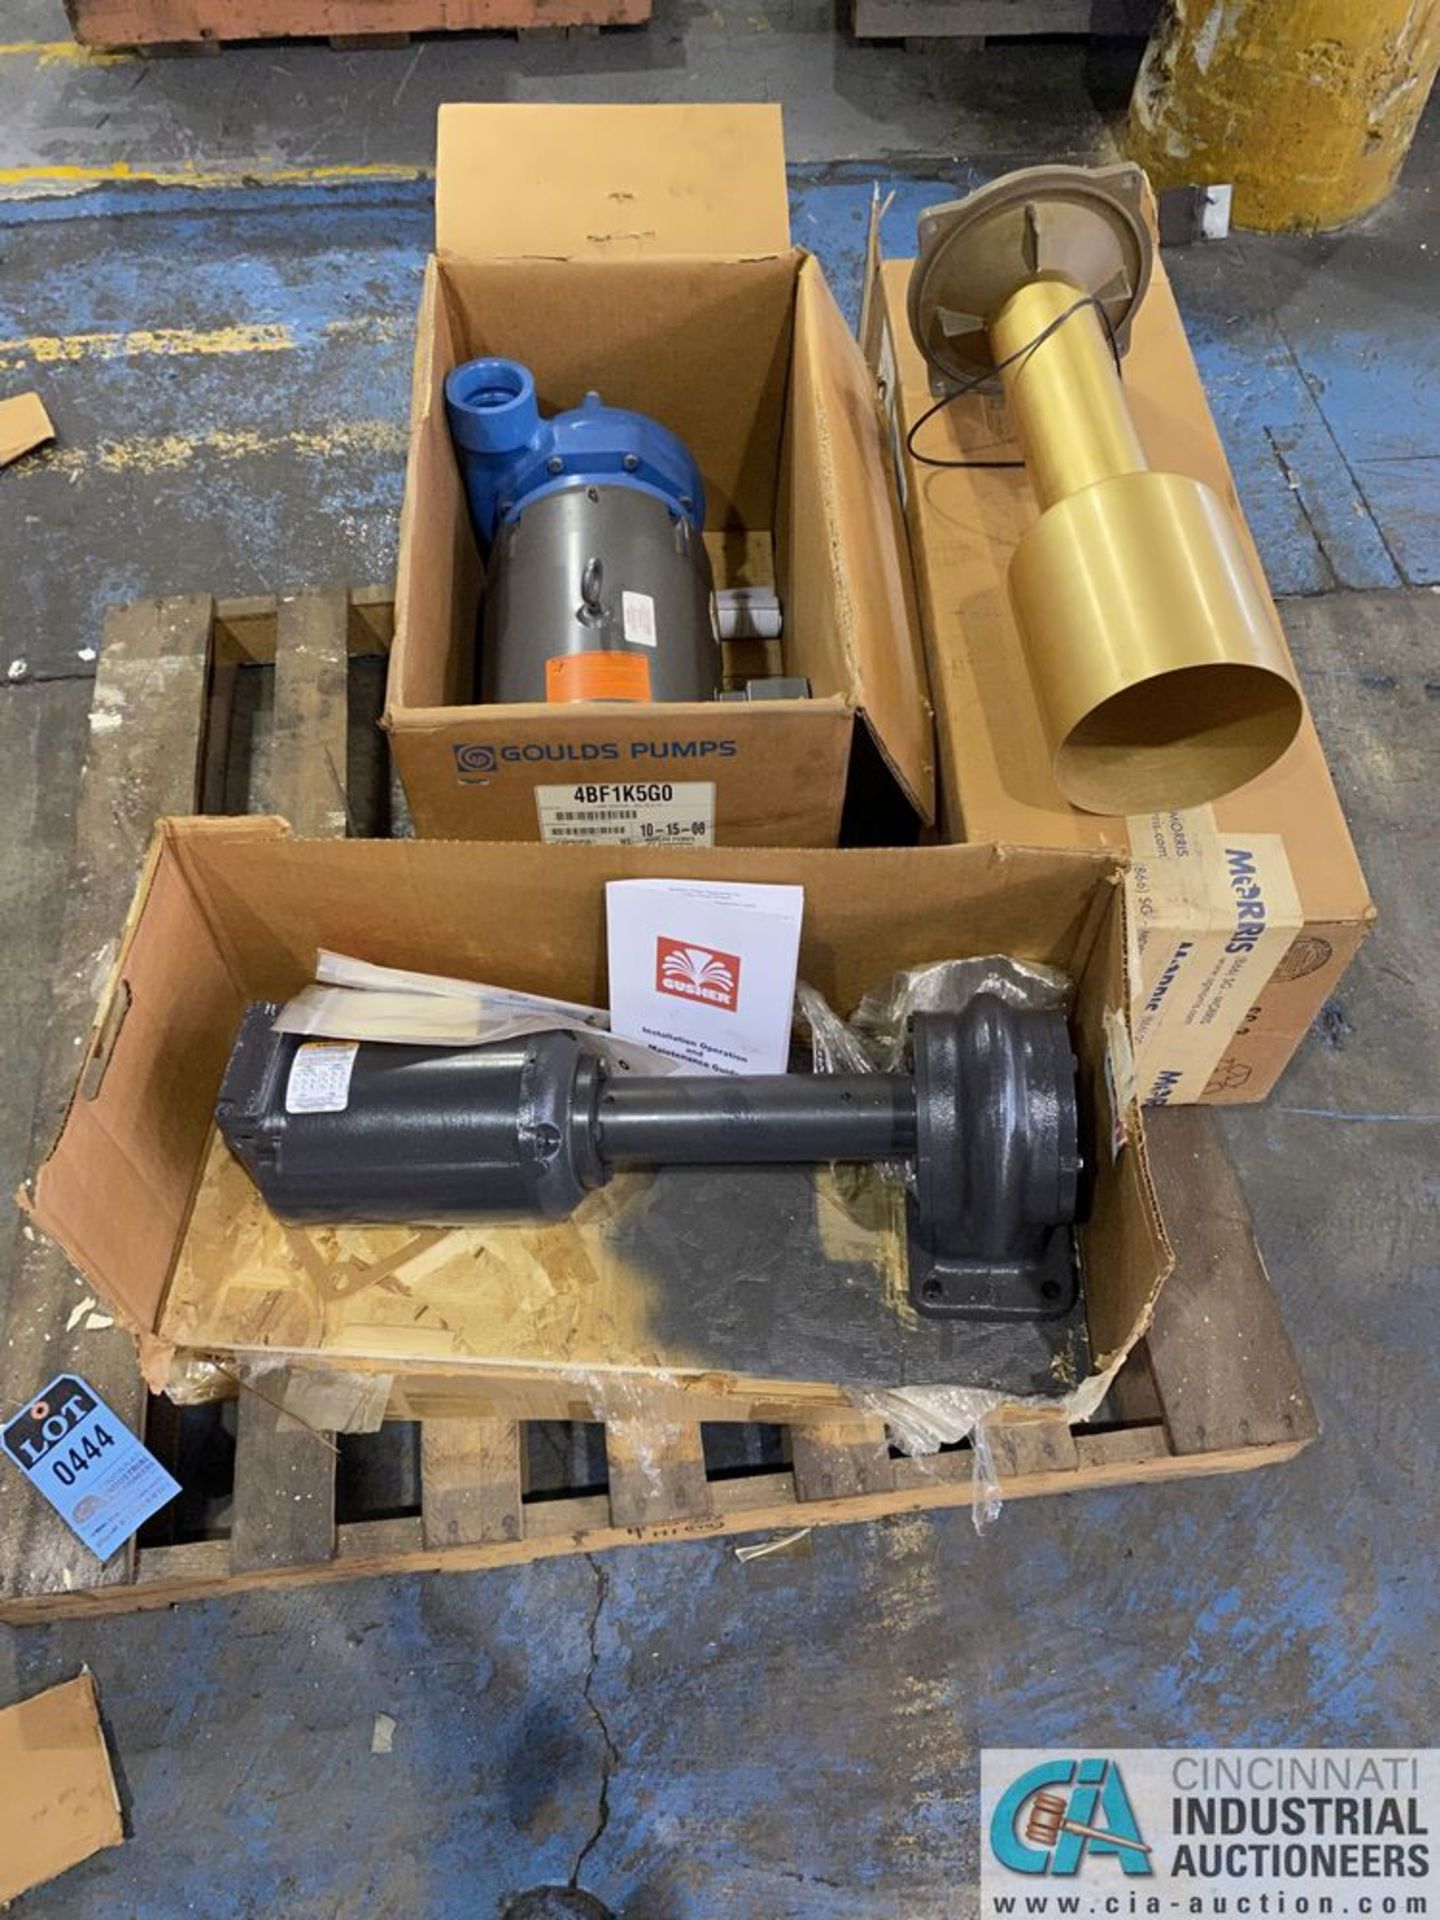 (LOT) ITEMS ON SKID; 7-1/2 HP BALDOR / GOULD WATER PUMP (NEW), (2) GUSHER 1/2 HP PUMPS (NEW) AND